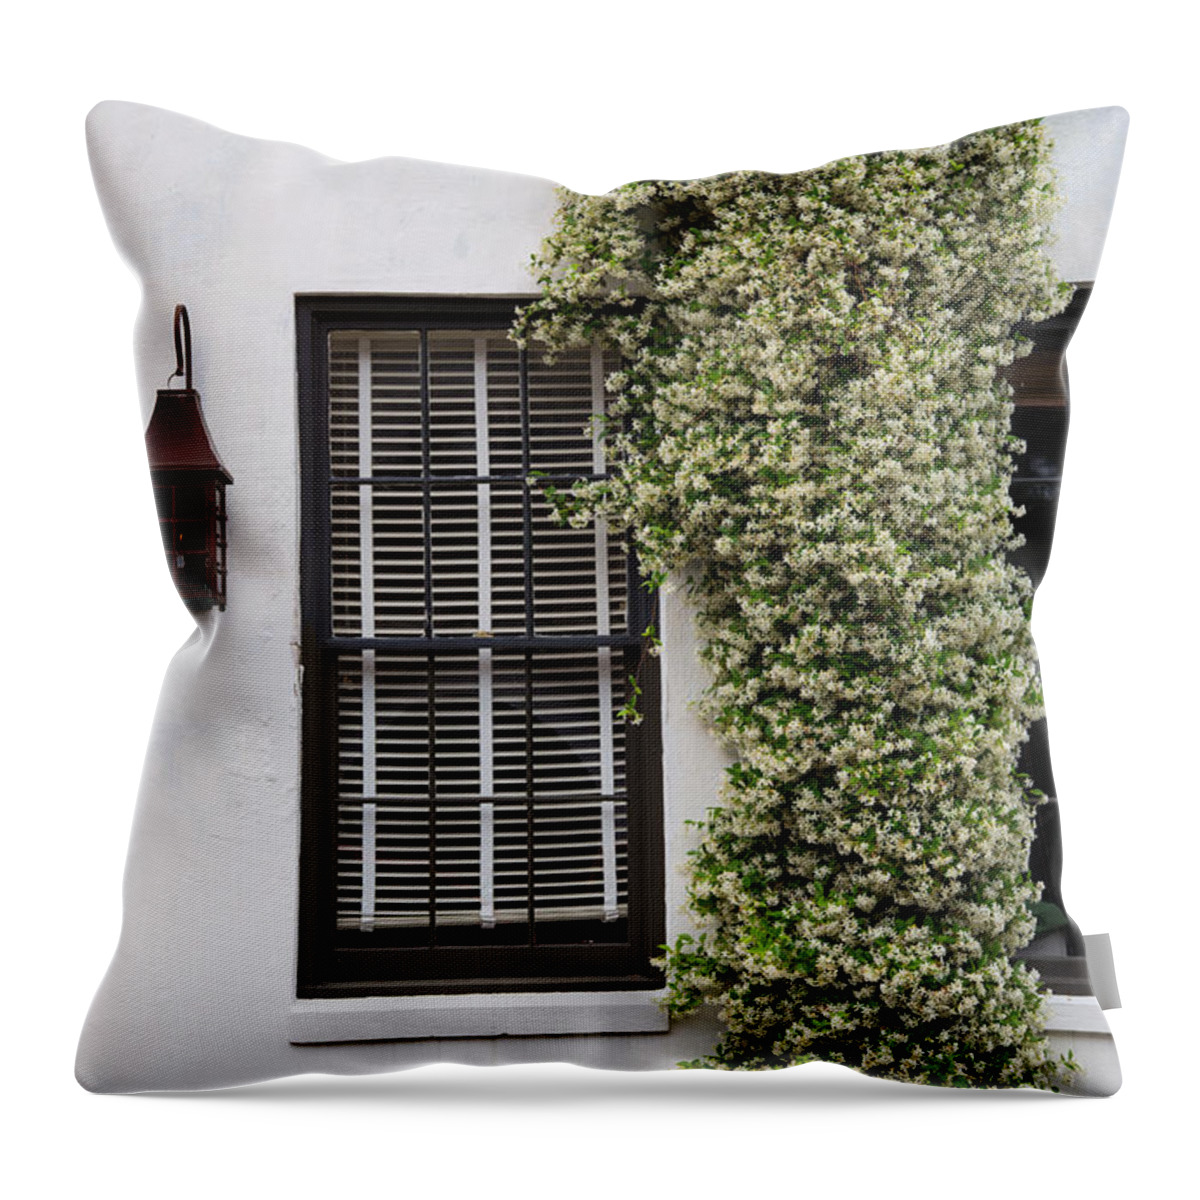 Nature Takes Over Throw Pillow featuring the photograph Nature Takes Over by Karol Livote